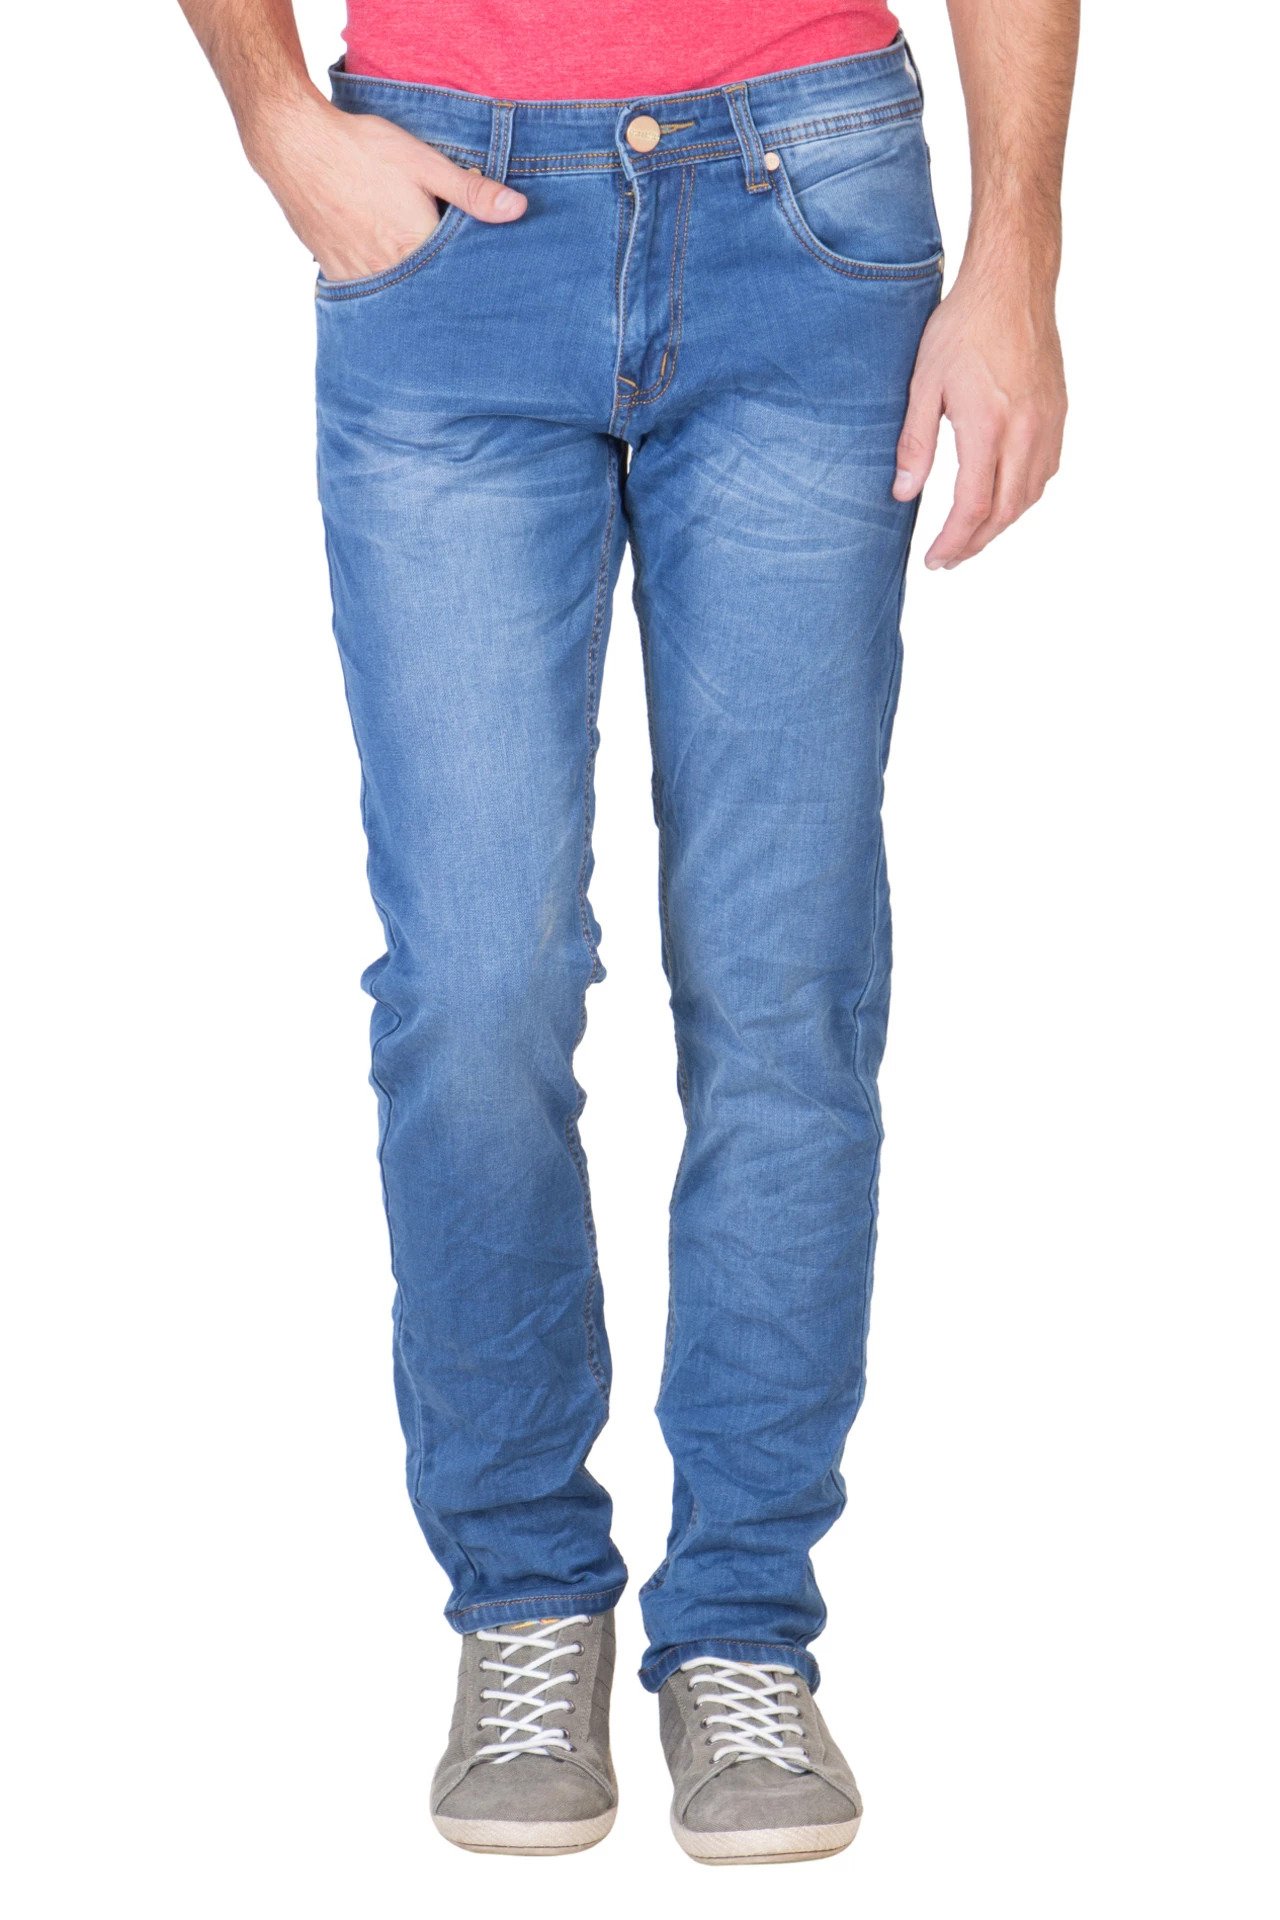 Blue Jeans: A leading Choice | Tailored Jeans's BLOG